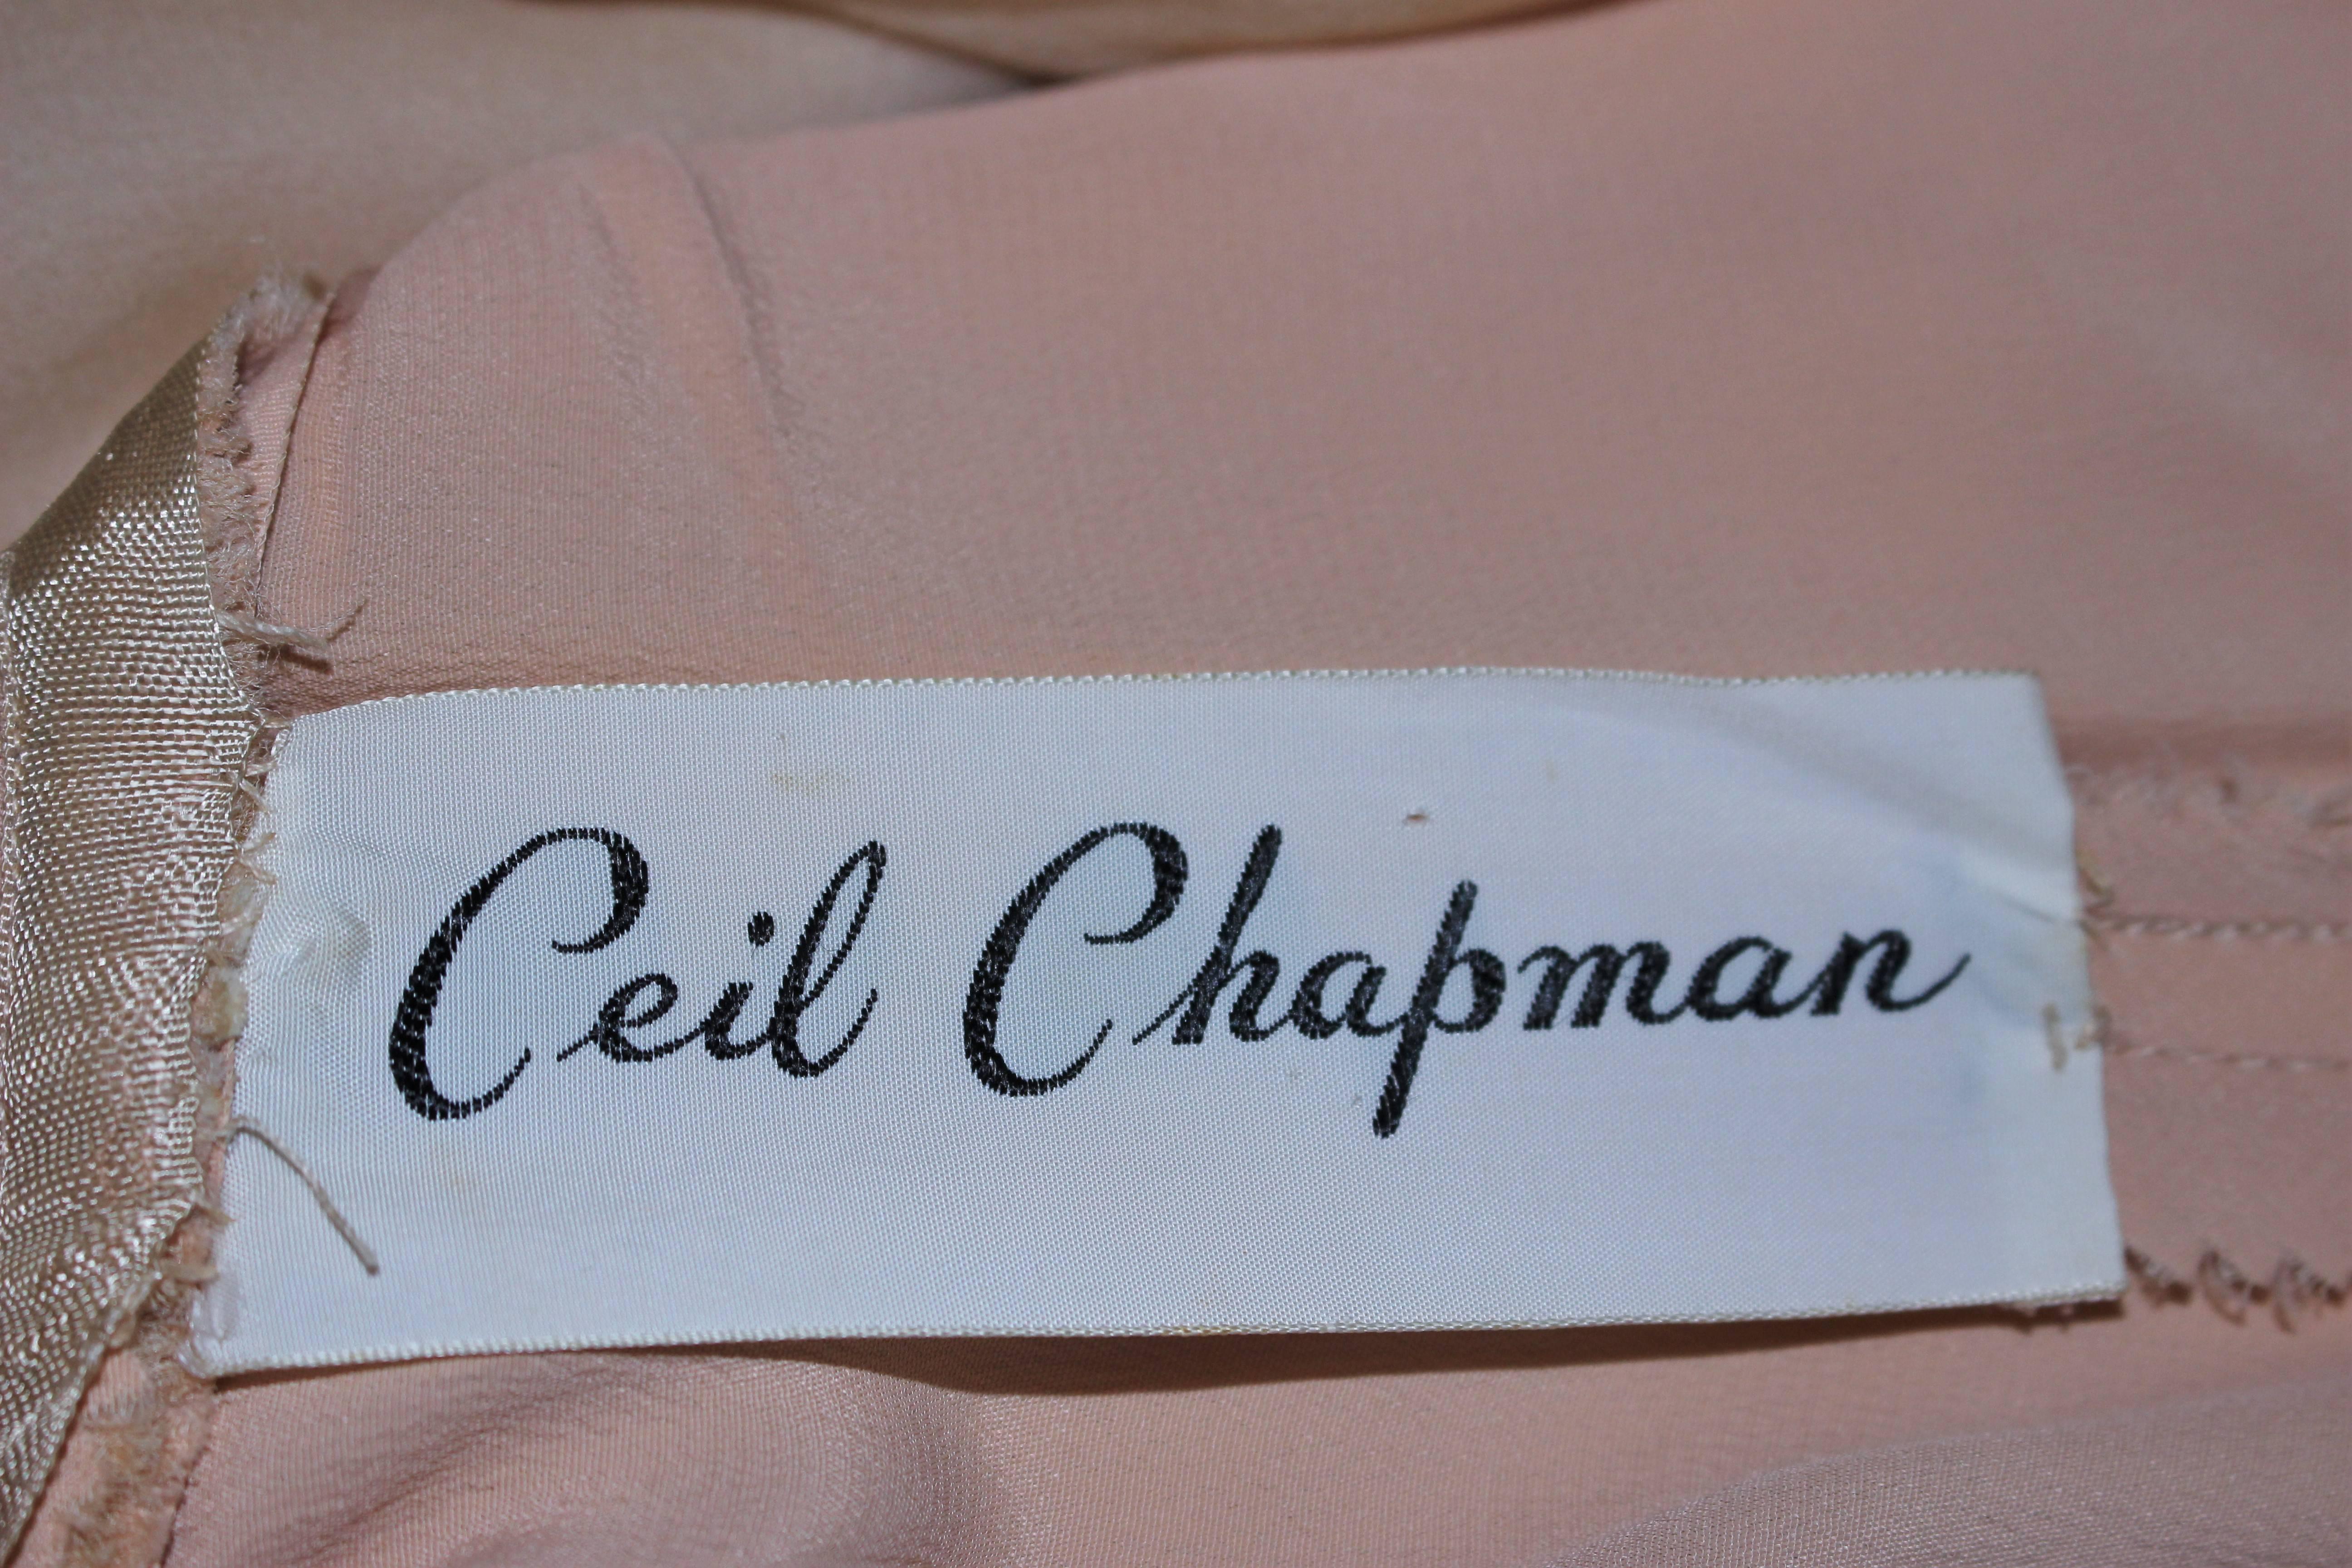 CEIL CHAPMAN Nude Chiffon Draped Gown Size 2 4 For Sale 5